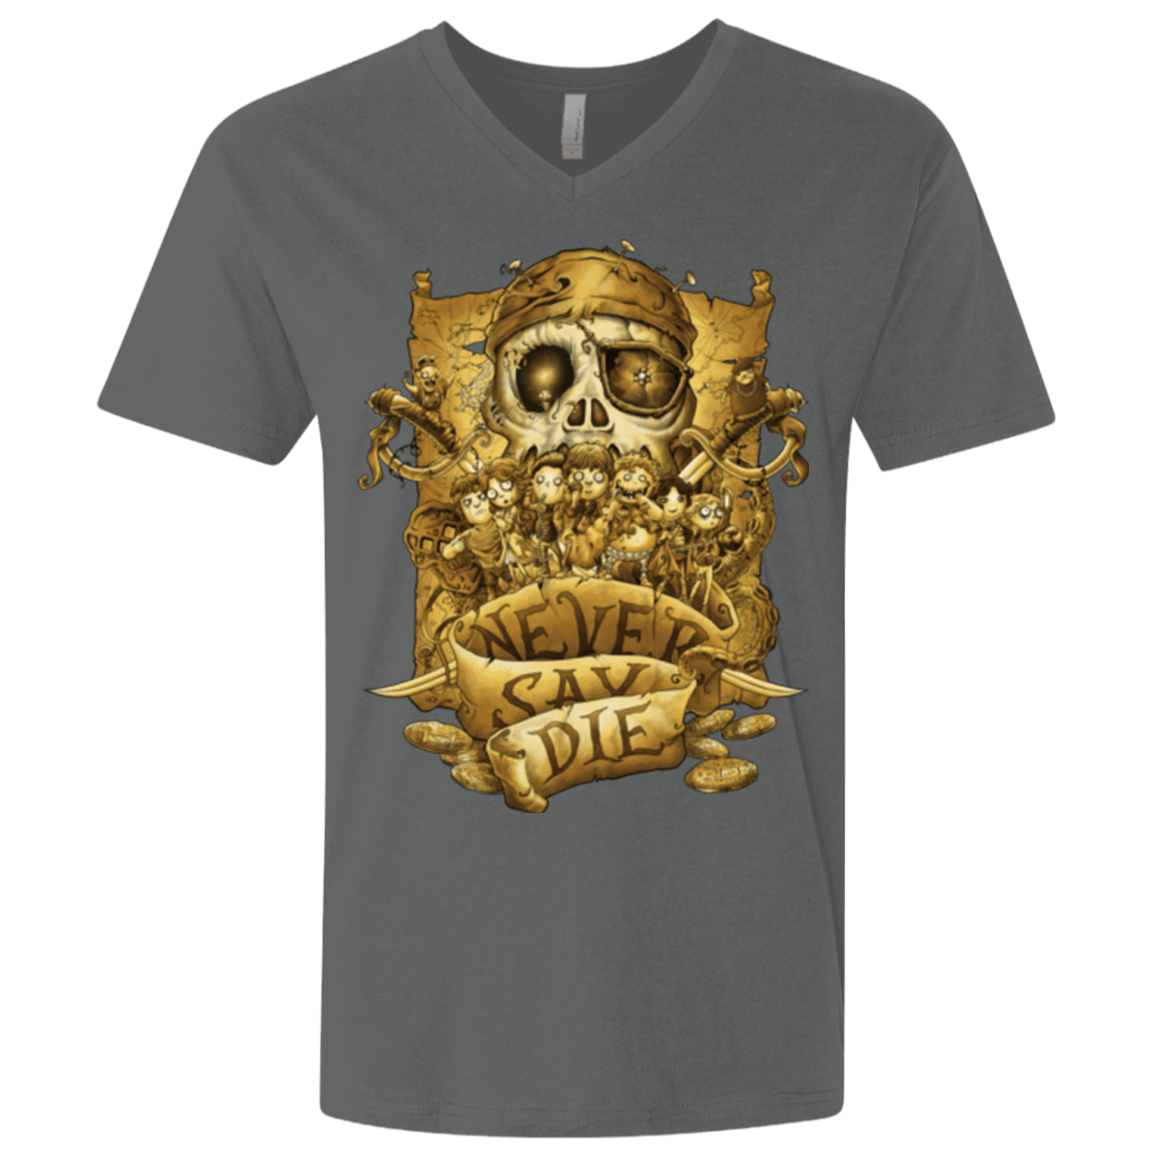 T-Shirts Heavy Metal / X-Small Never Say Die Men's Premium V-Neck